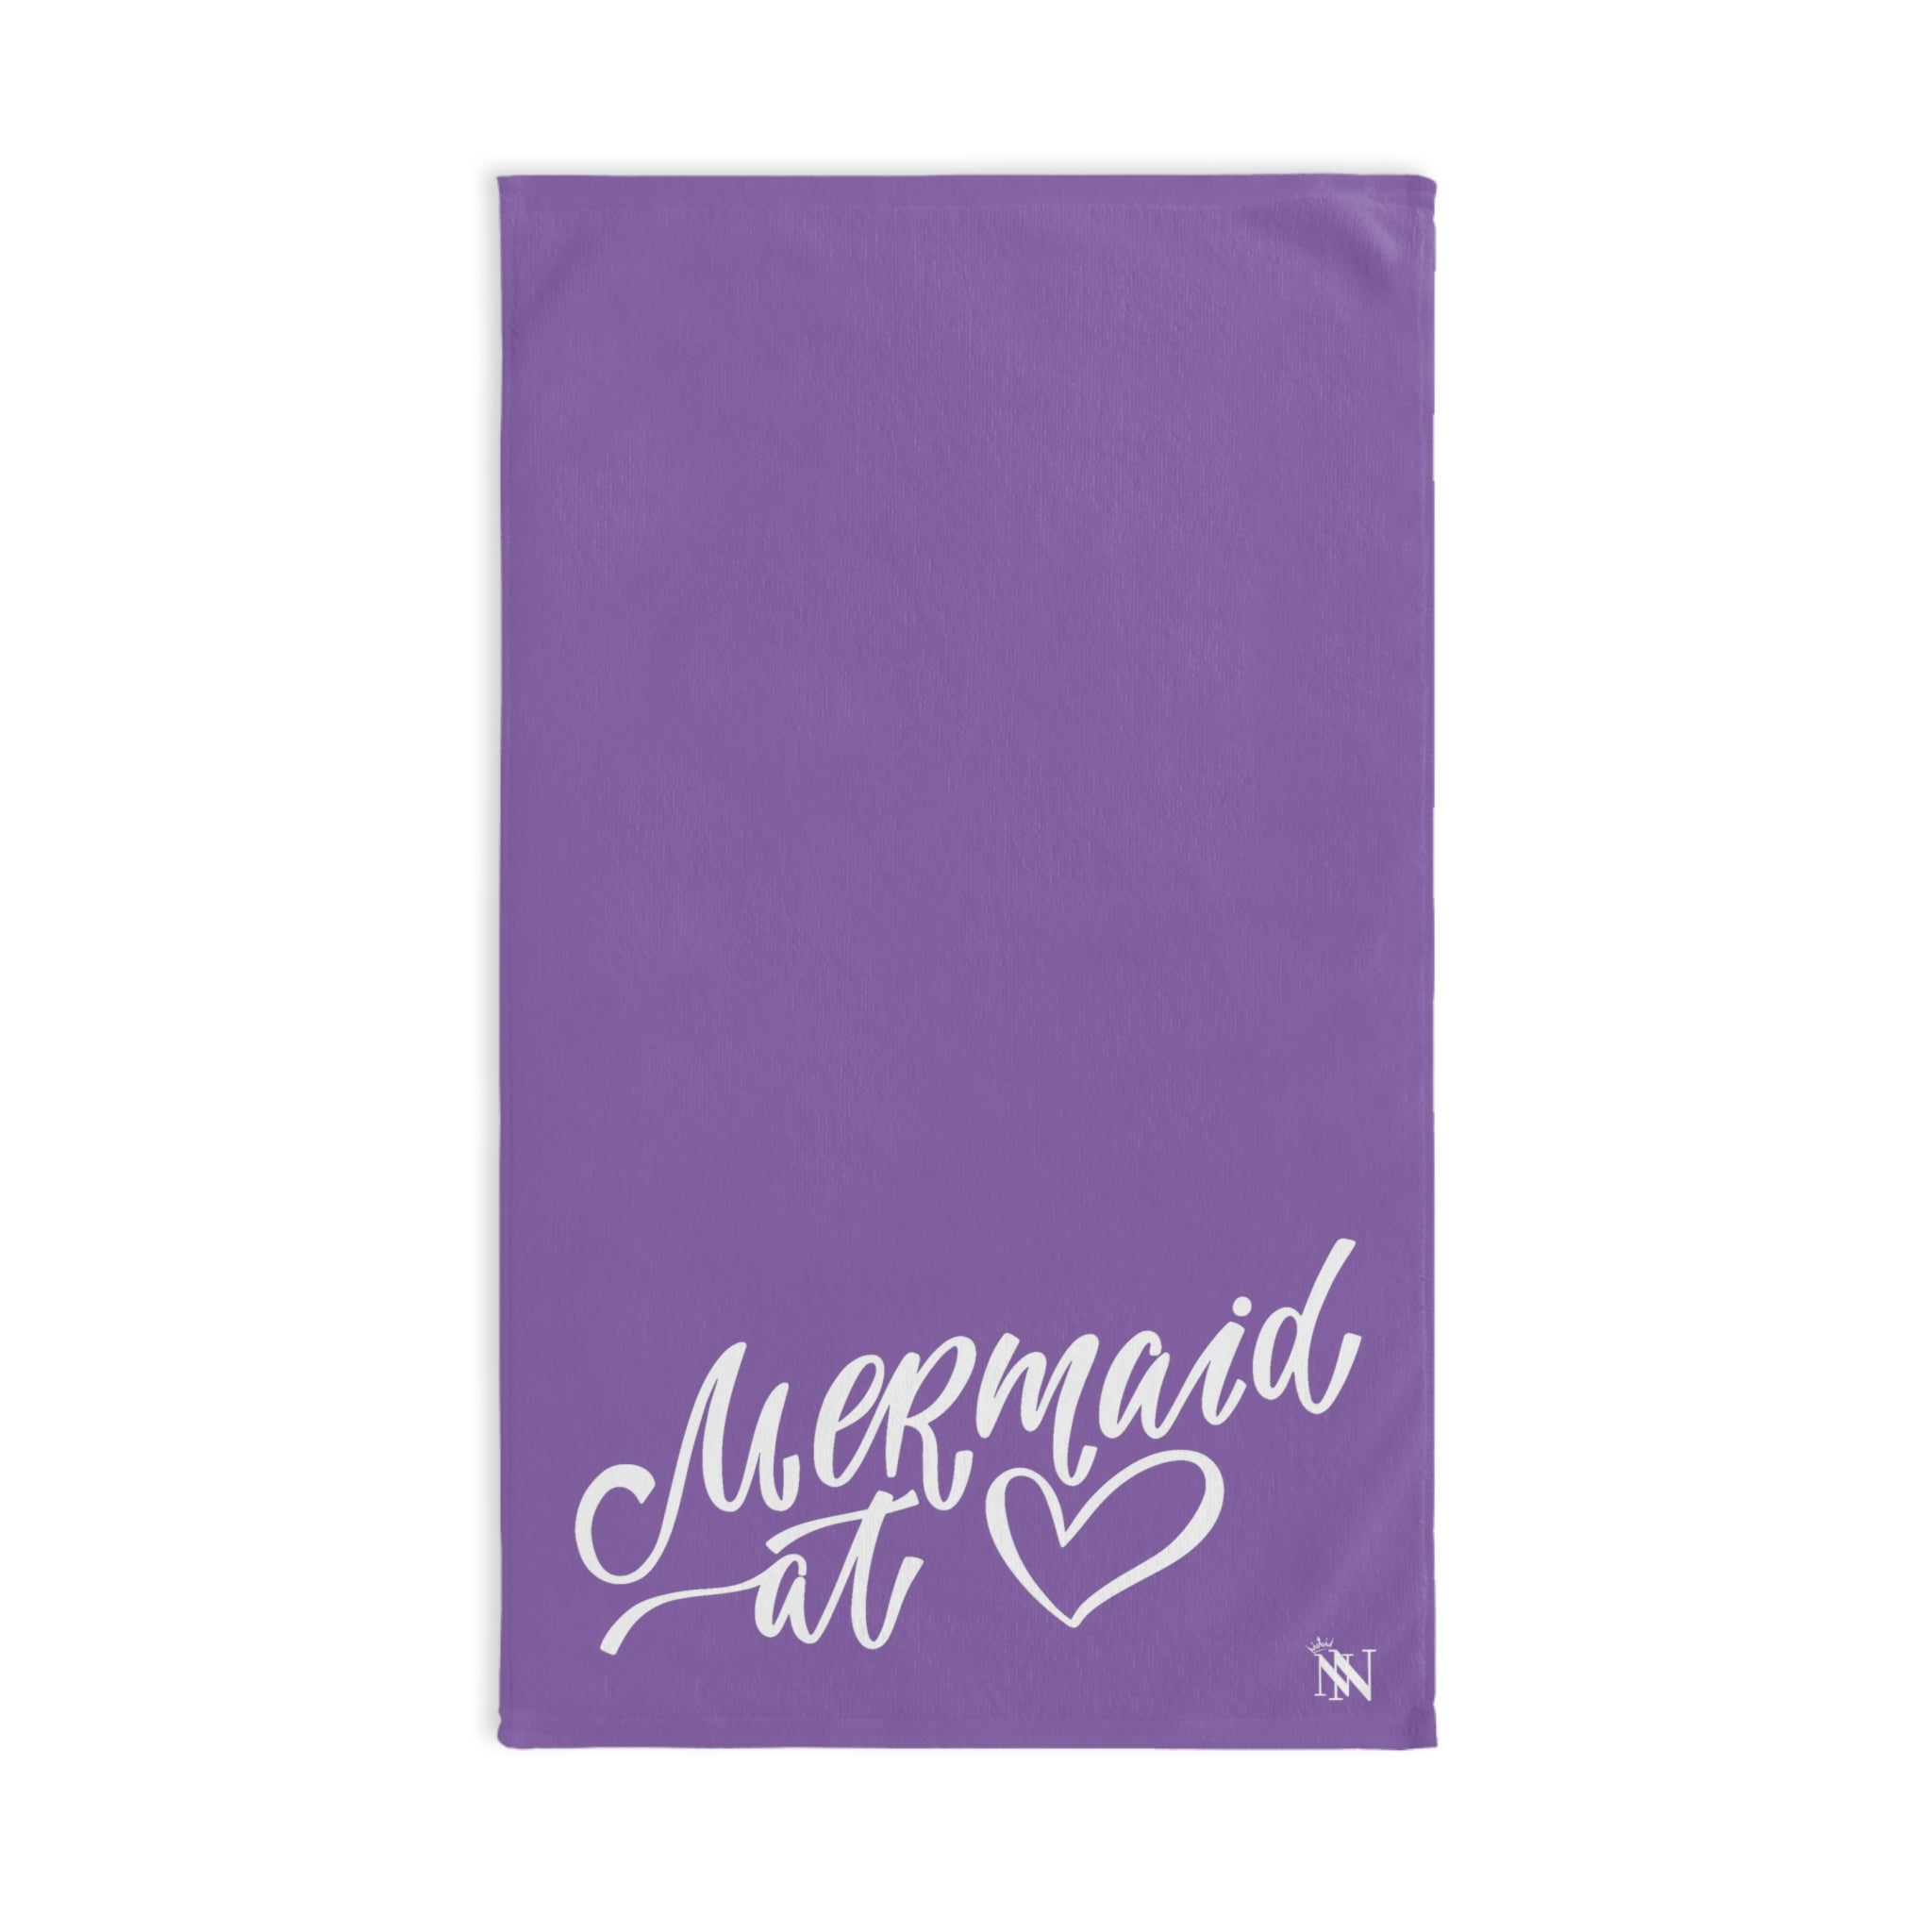 Mermaid At Heart Lavendar | Funny Gifts for Men - Gifts for Him - Birthday Gifts for Men, Him, Husband, Boyfriend, New Couple Gifts, Fathers & Valentines Day Gifts, Hand Towels NECTAR NAPKINS